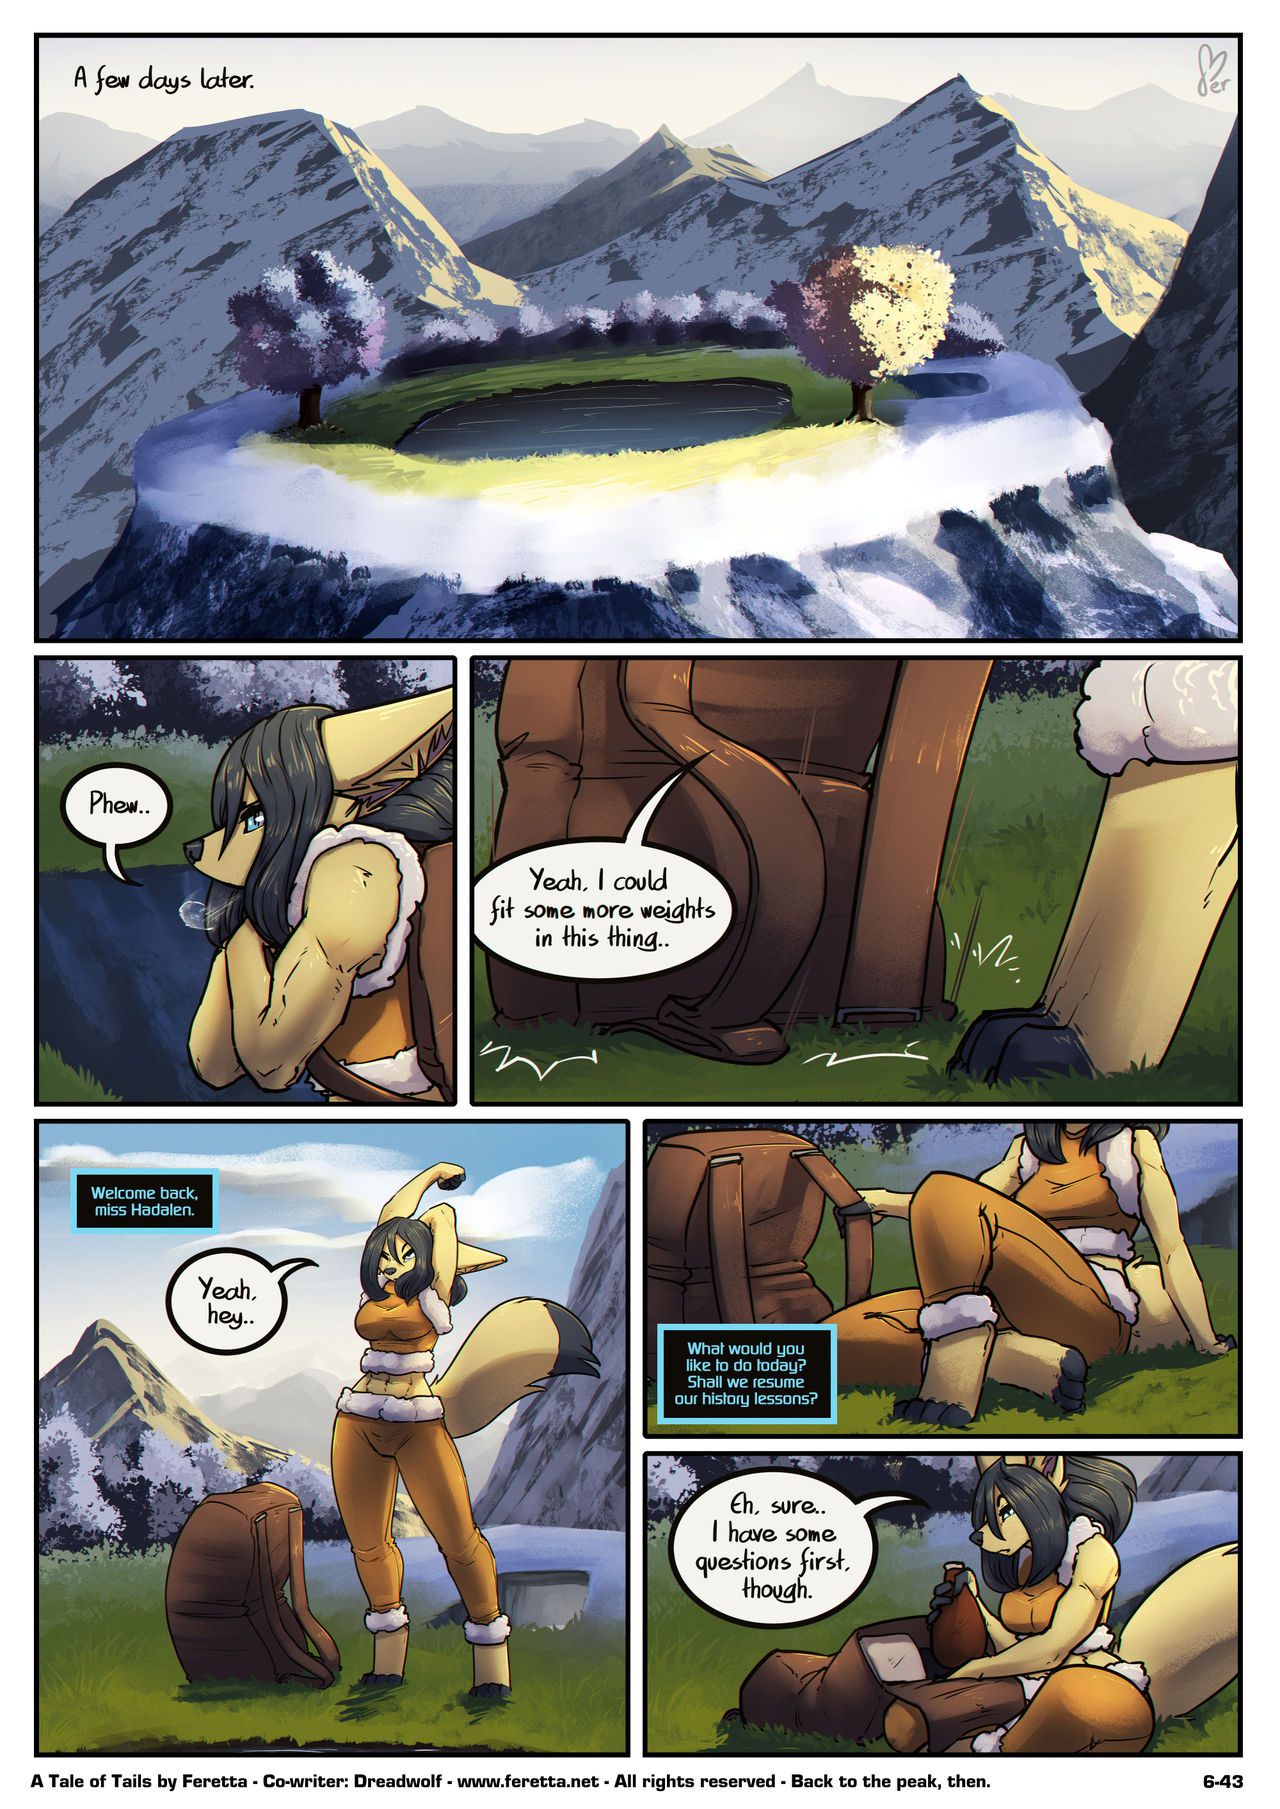 [Feretta] Farellian Legends: A Tale of Tails (w/Extras) [Ongoing] 338